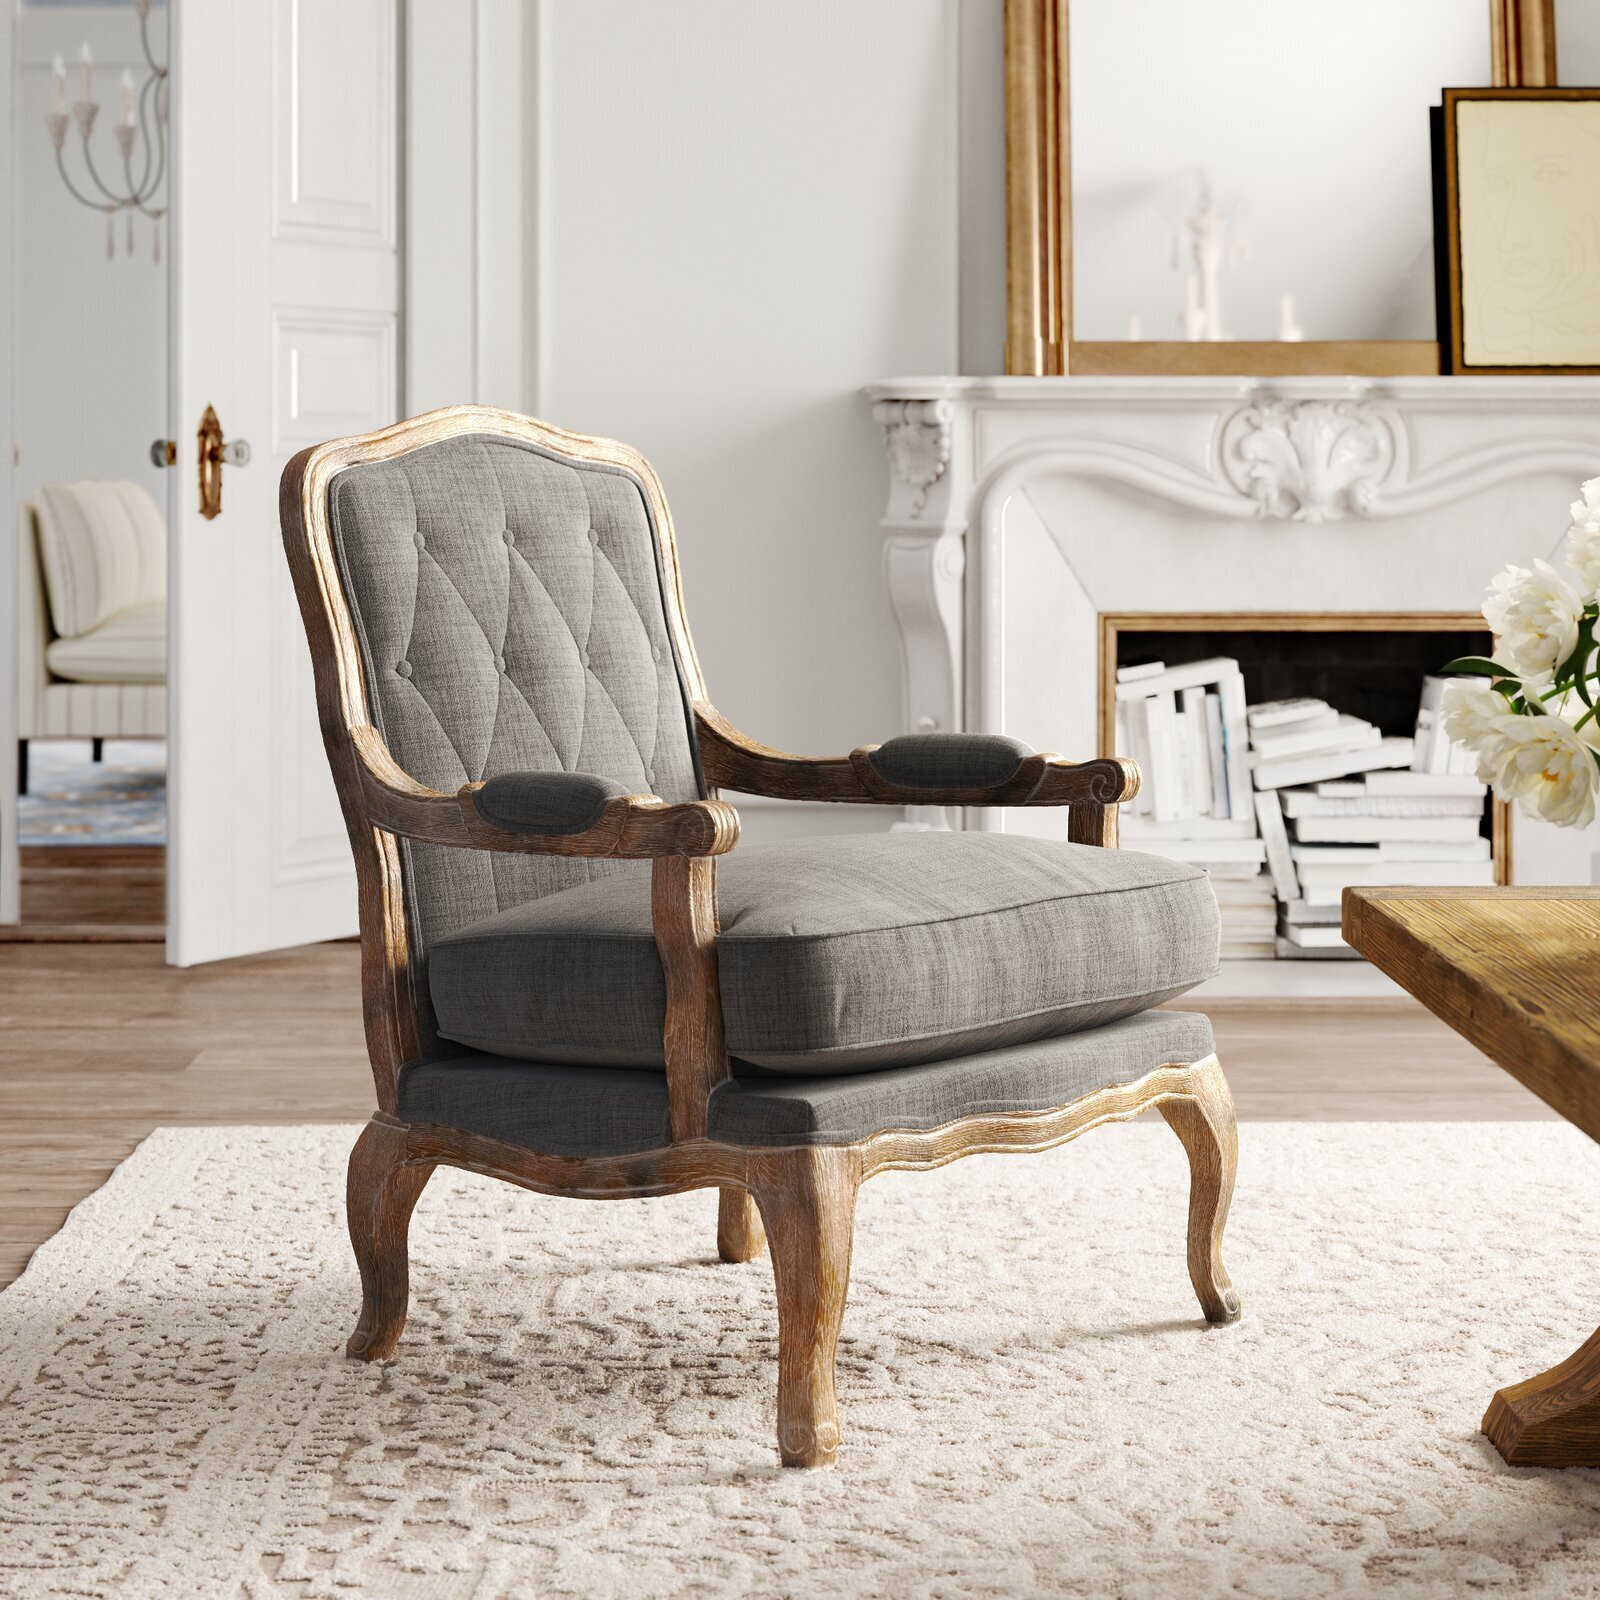 Elegant and Grand Narrow Upholstered Chair